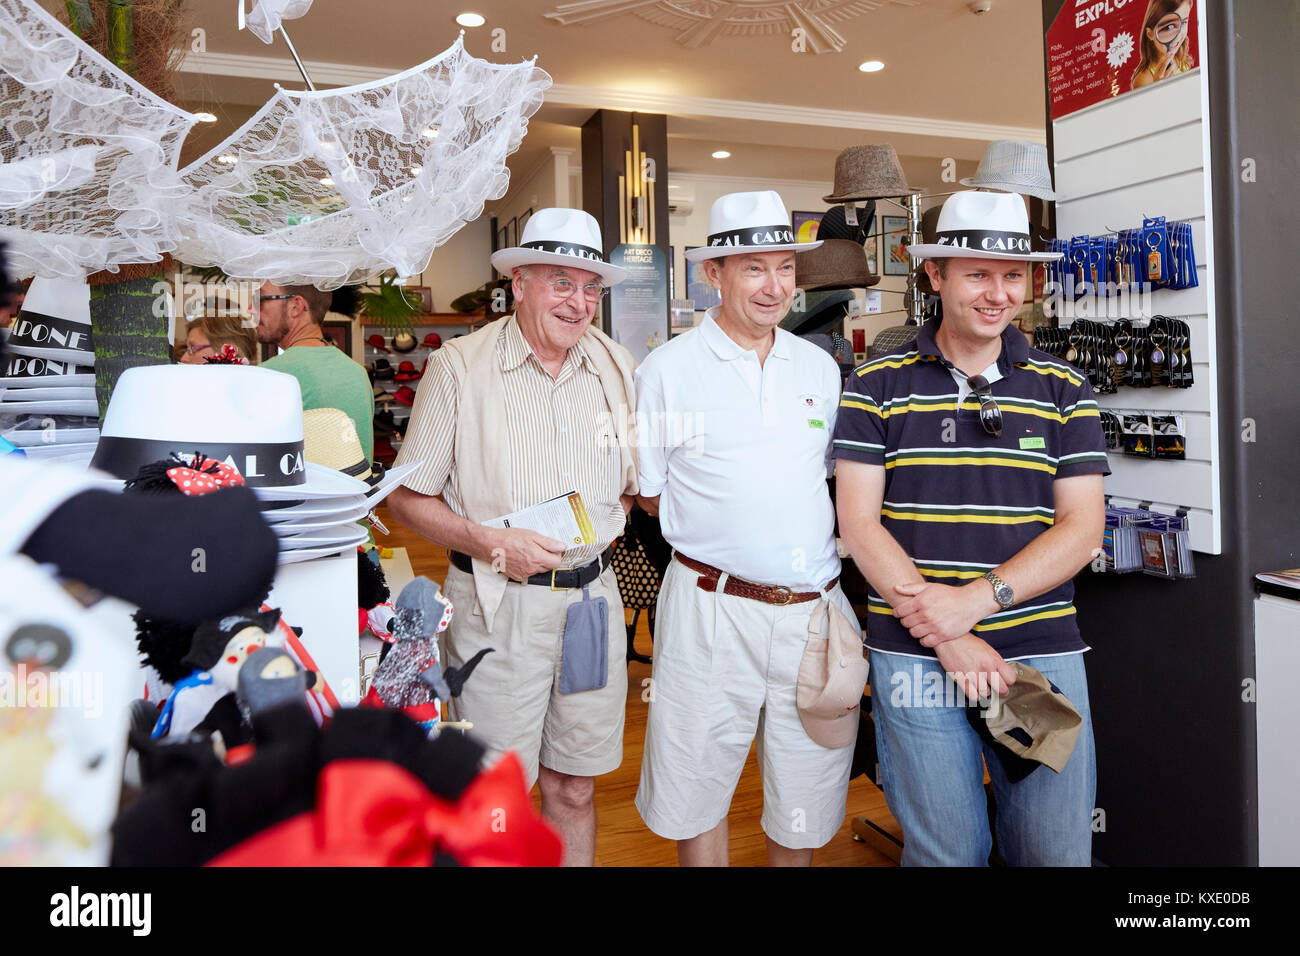 Three man at the Art Deco Centre souvenirs store with Al Capone hats, Hershell Street, Napier, New Zealand Stock Photo